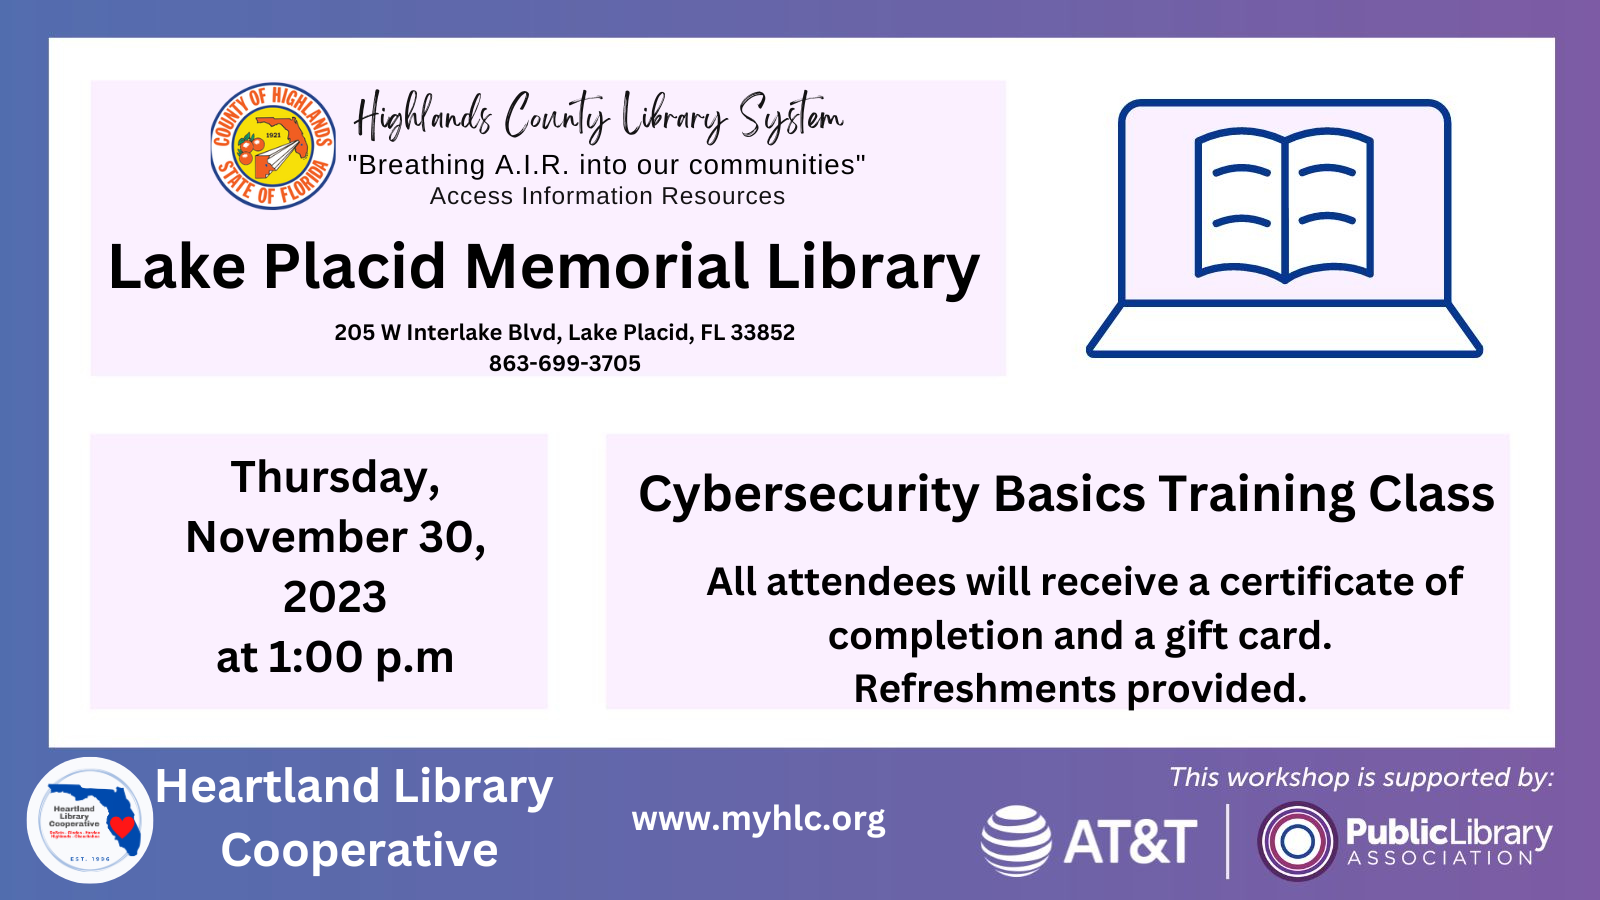 On Thursday, November 30, 2023 at 1 p.m., the Lake Placid Memorial Library will host a Cybersecurity Basics course.